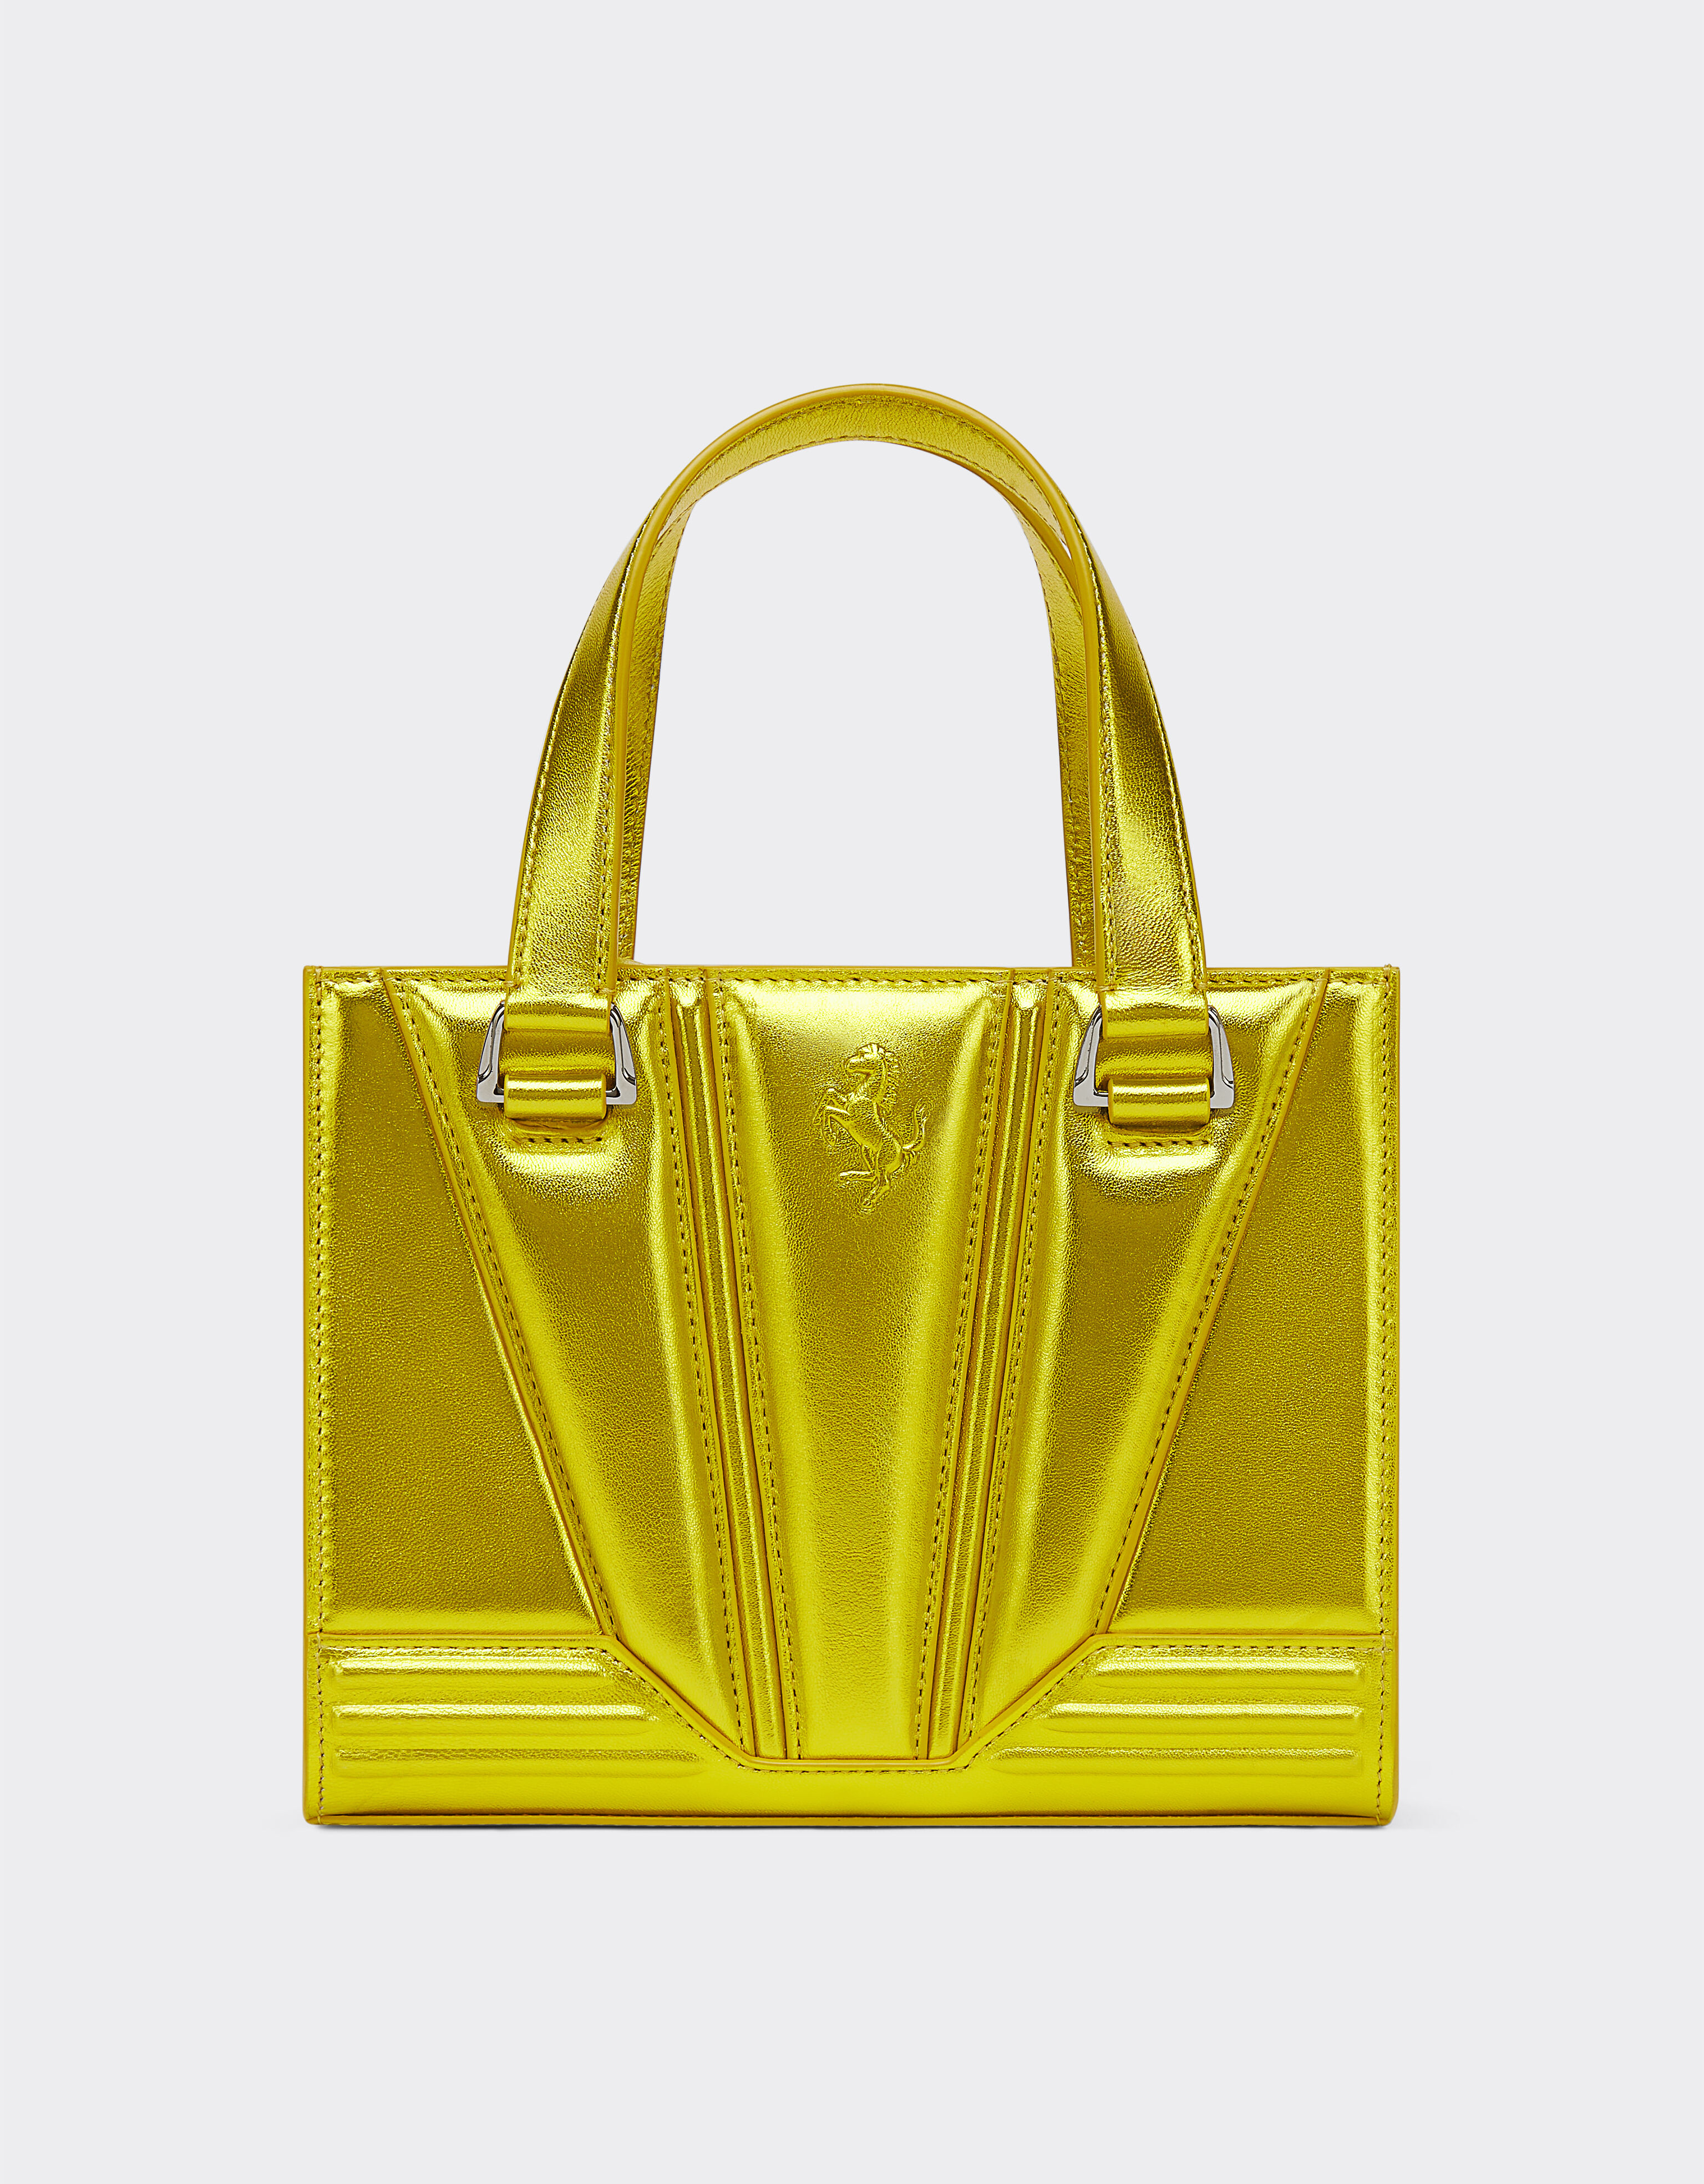 ${brand} Ferrari mini tote GT bag in laminated leather with Prancing Horse detail ${colorDescription} ${masterID}